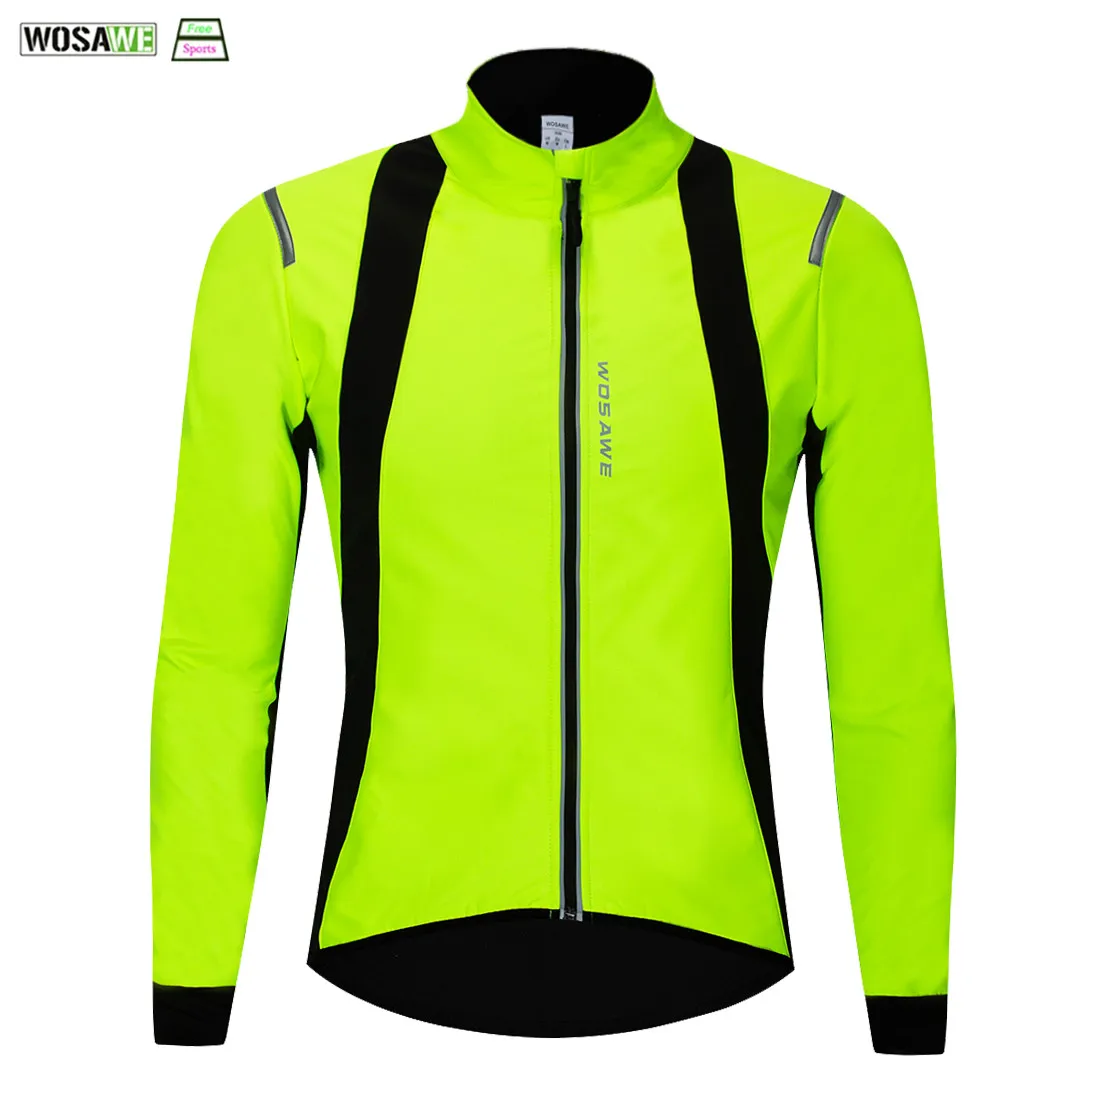 Cycling Jacket Windstopper Winter Thermal Windproof Long Sleeve cycle Coat Warm 